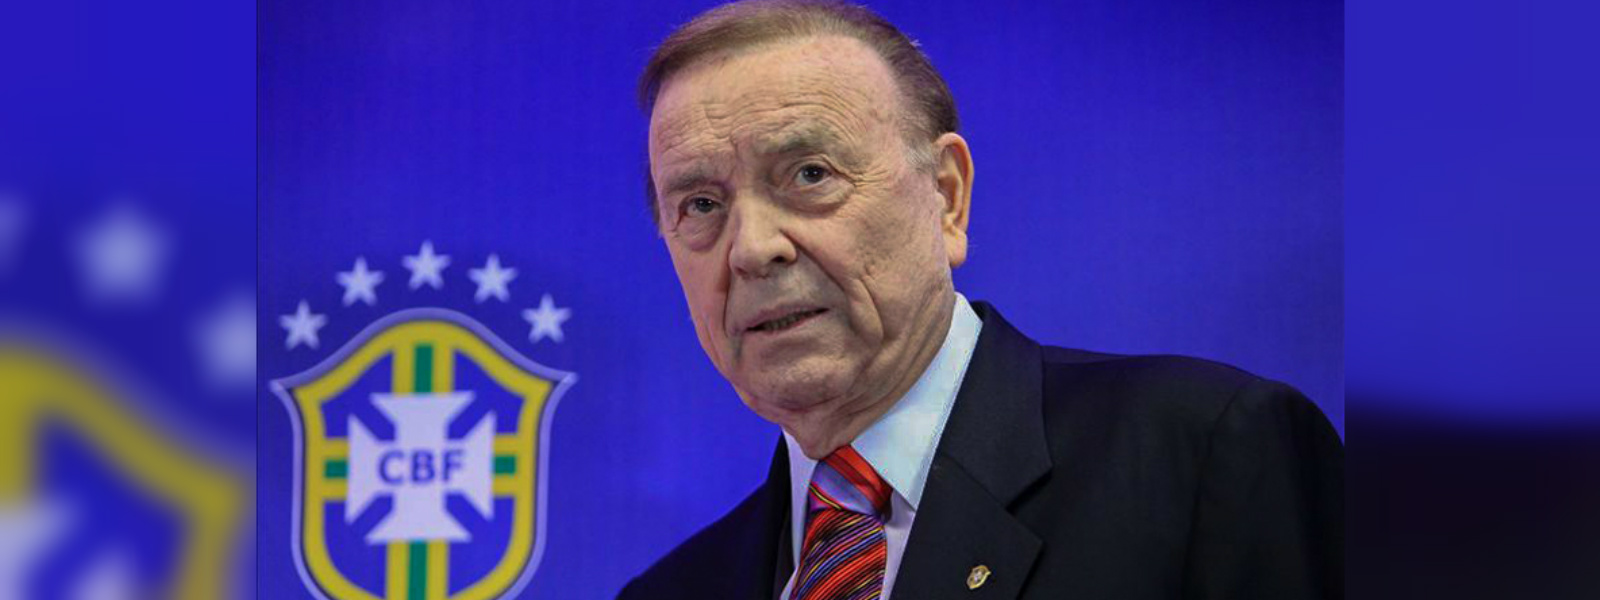 Former Brazilian soccer chief sentenced to 4 years